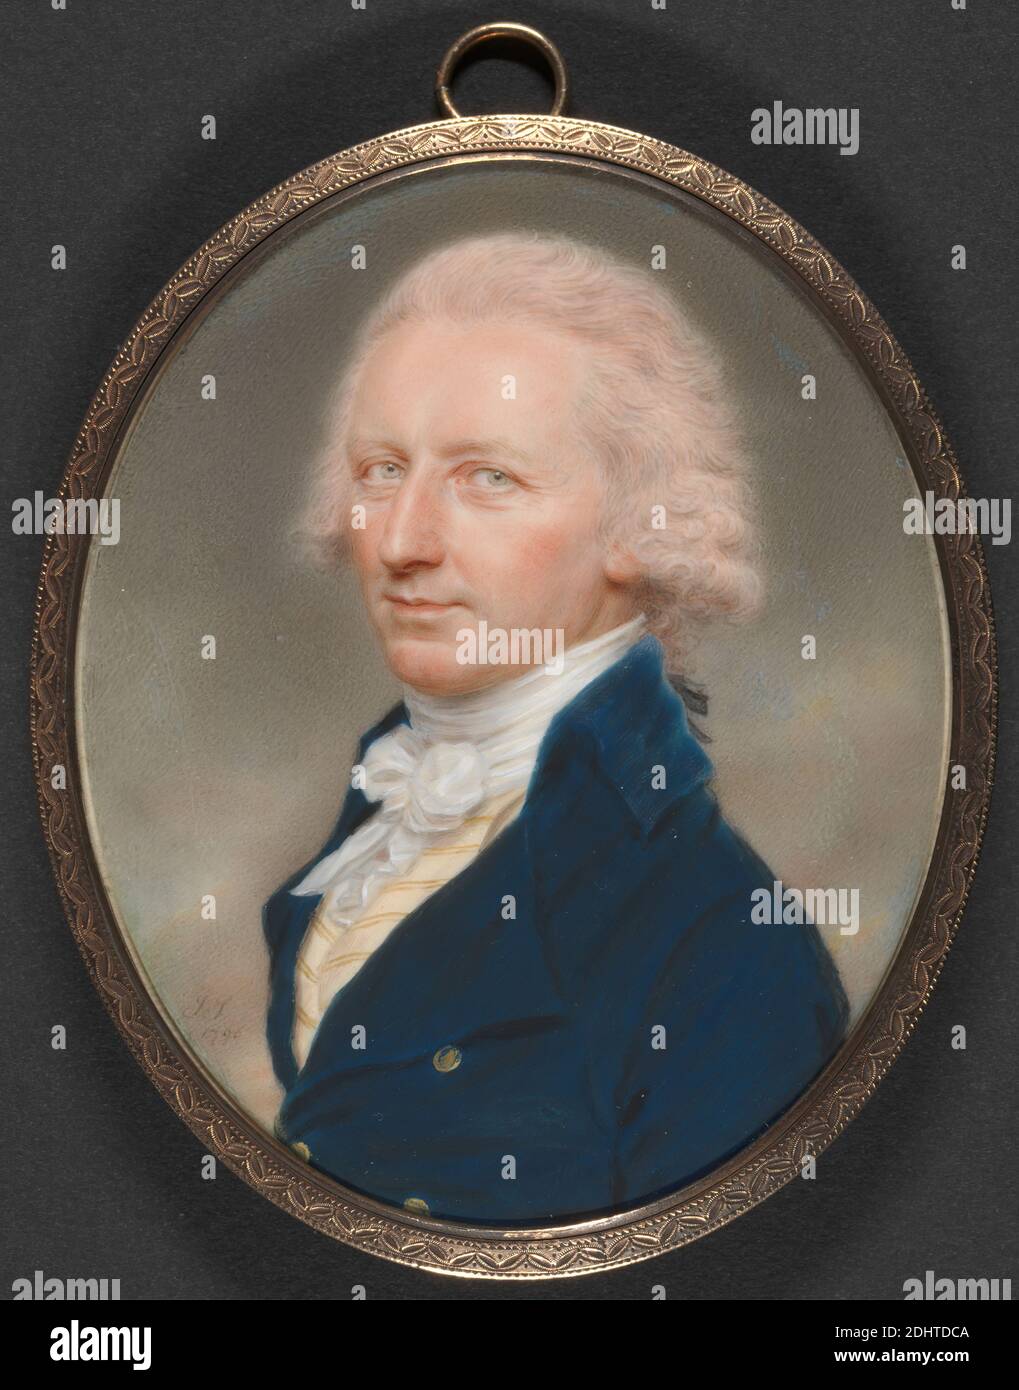 General Stevenson, John Smart, 1741–1811, British, 1796, Watercolor and gouache on ivory, Image: 3 x 2 1/2 inches (7.6 x 6.4 cm) and Frame: 3 1/2 x 2 3/4 x 1/4 inches (8.9 x 7 x 0.6 cm), portrait Stock Photo